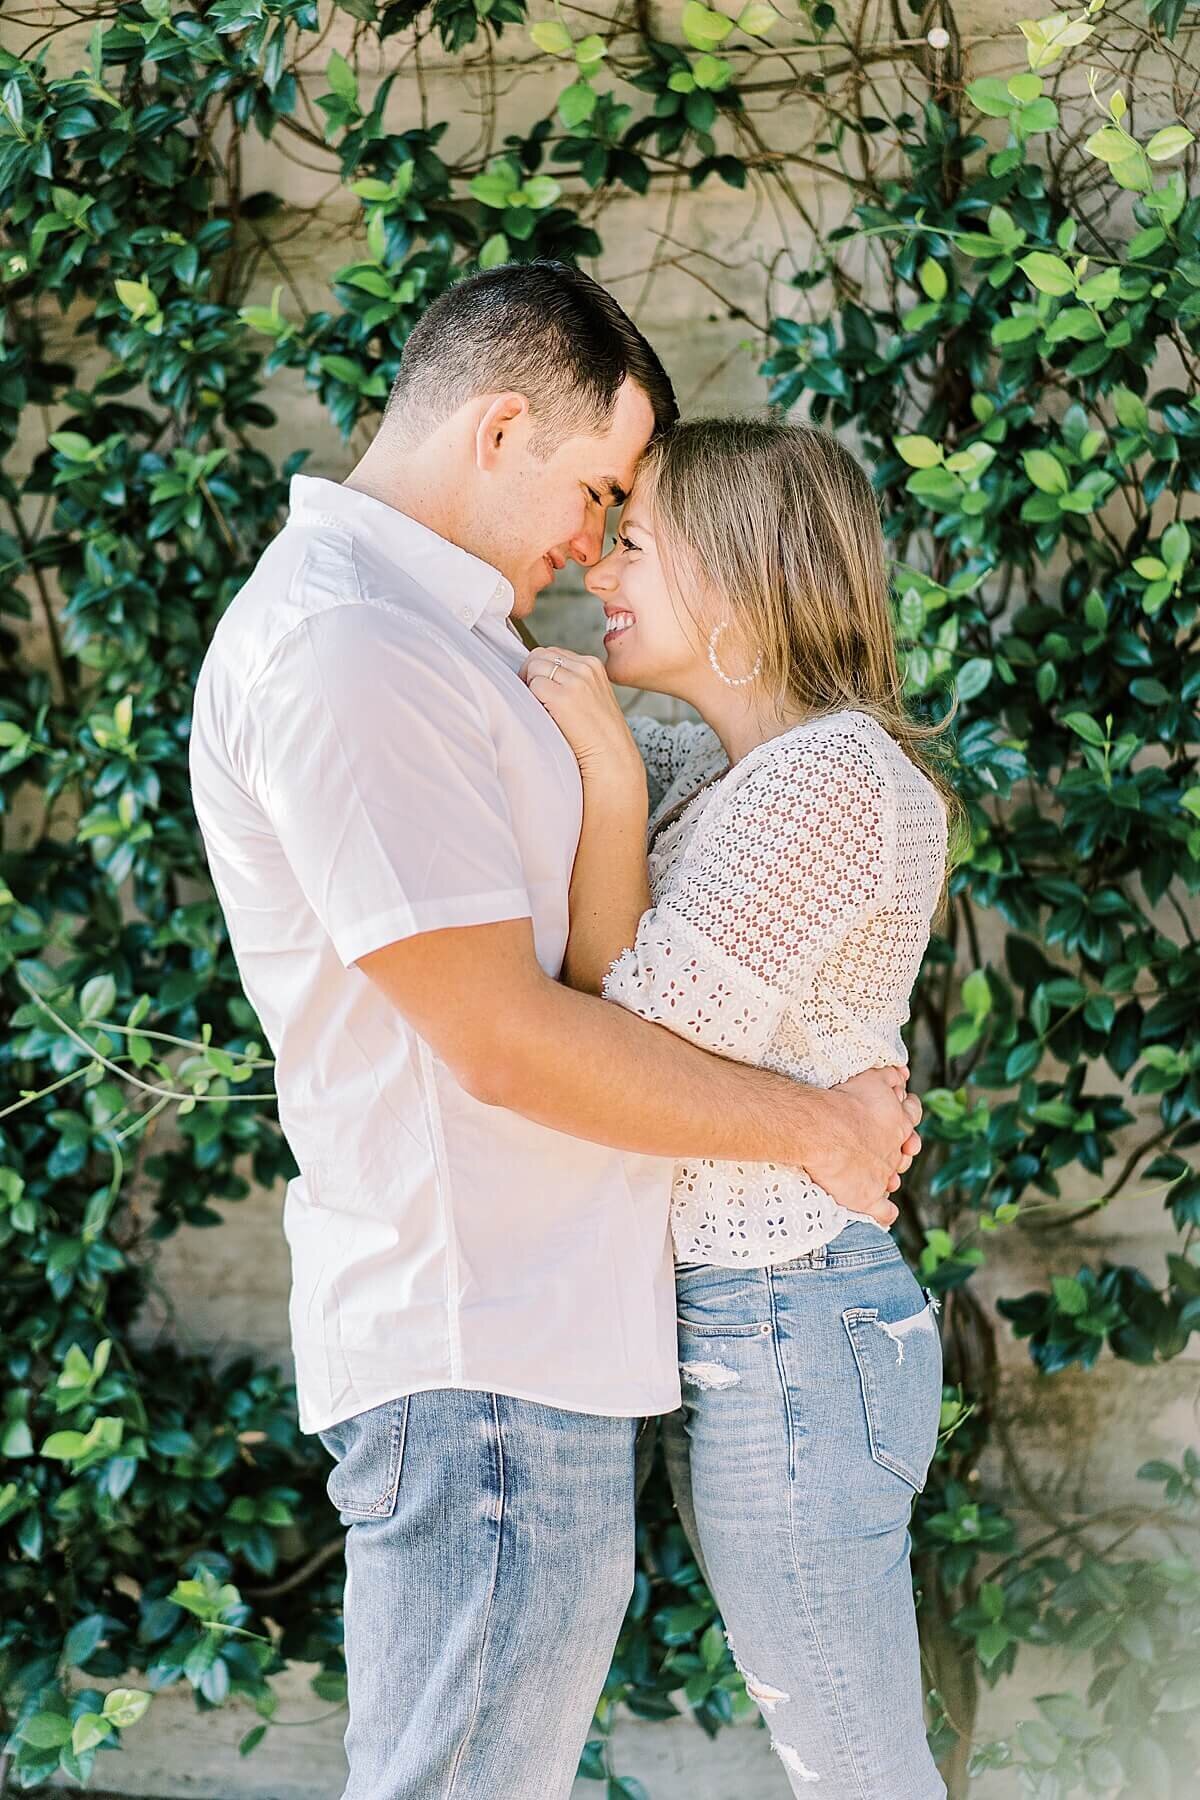 McGovern-Centennial-Gardens-Hermann-Park-Engagement-Session-Alicia-Yarrish-Photography_0020